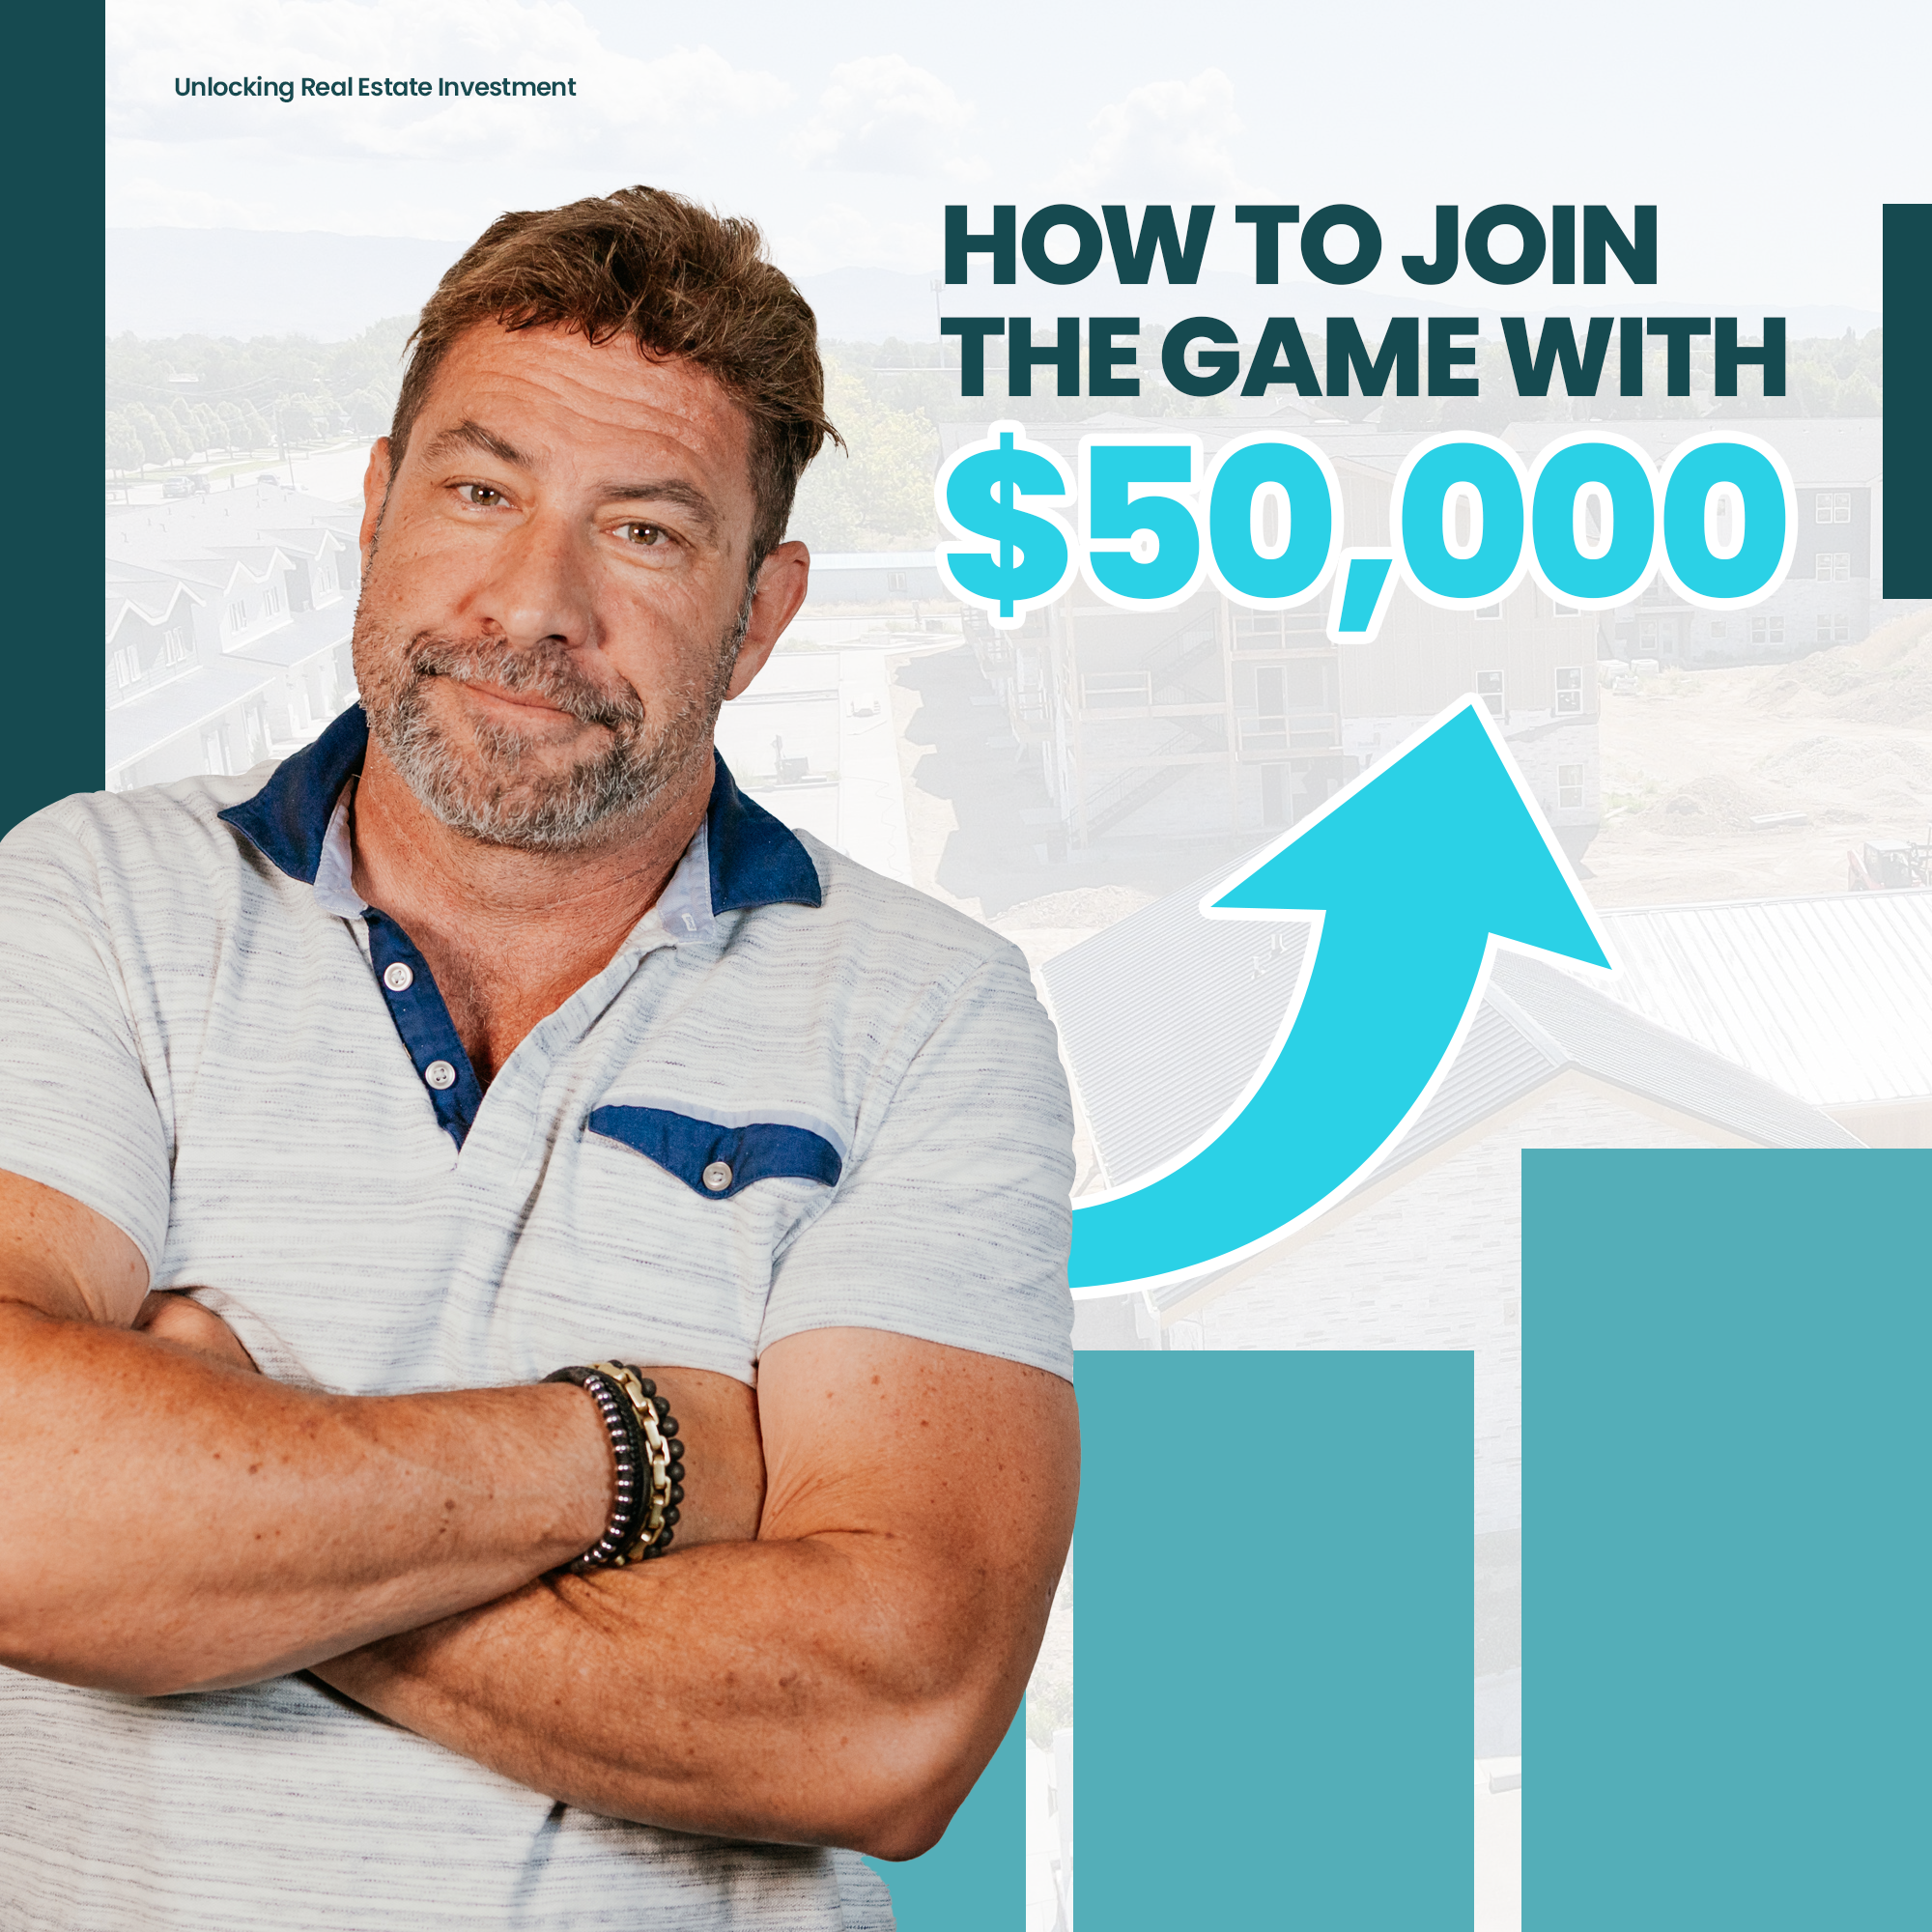 Unlocking Real Estate Investment: How to Join the Game with $50,000